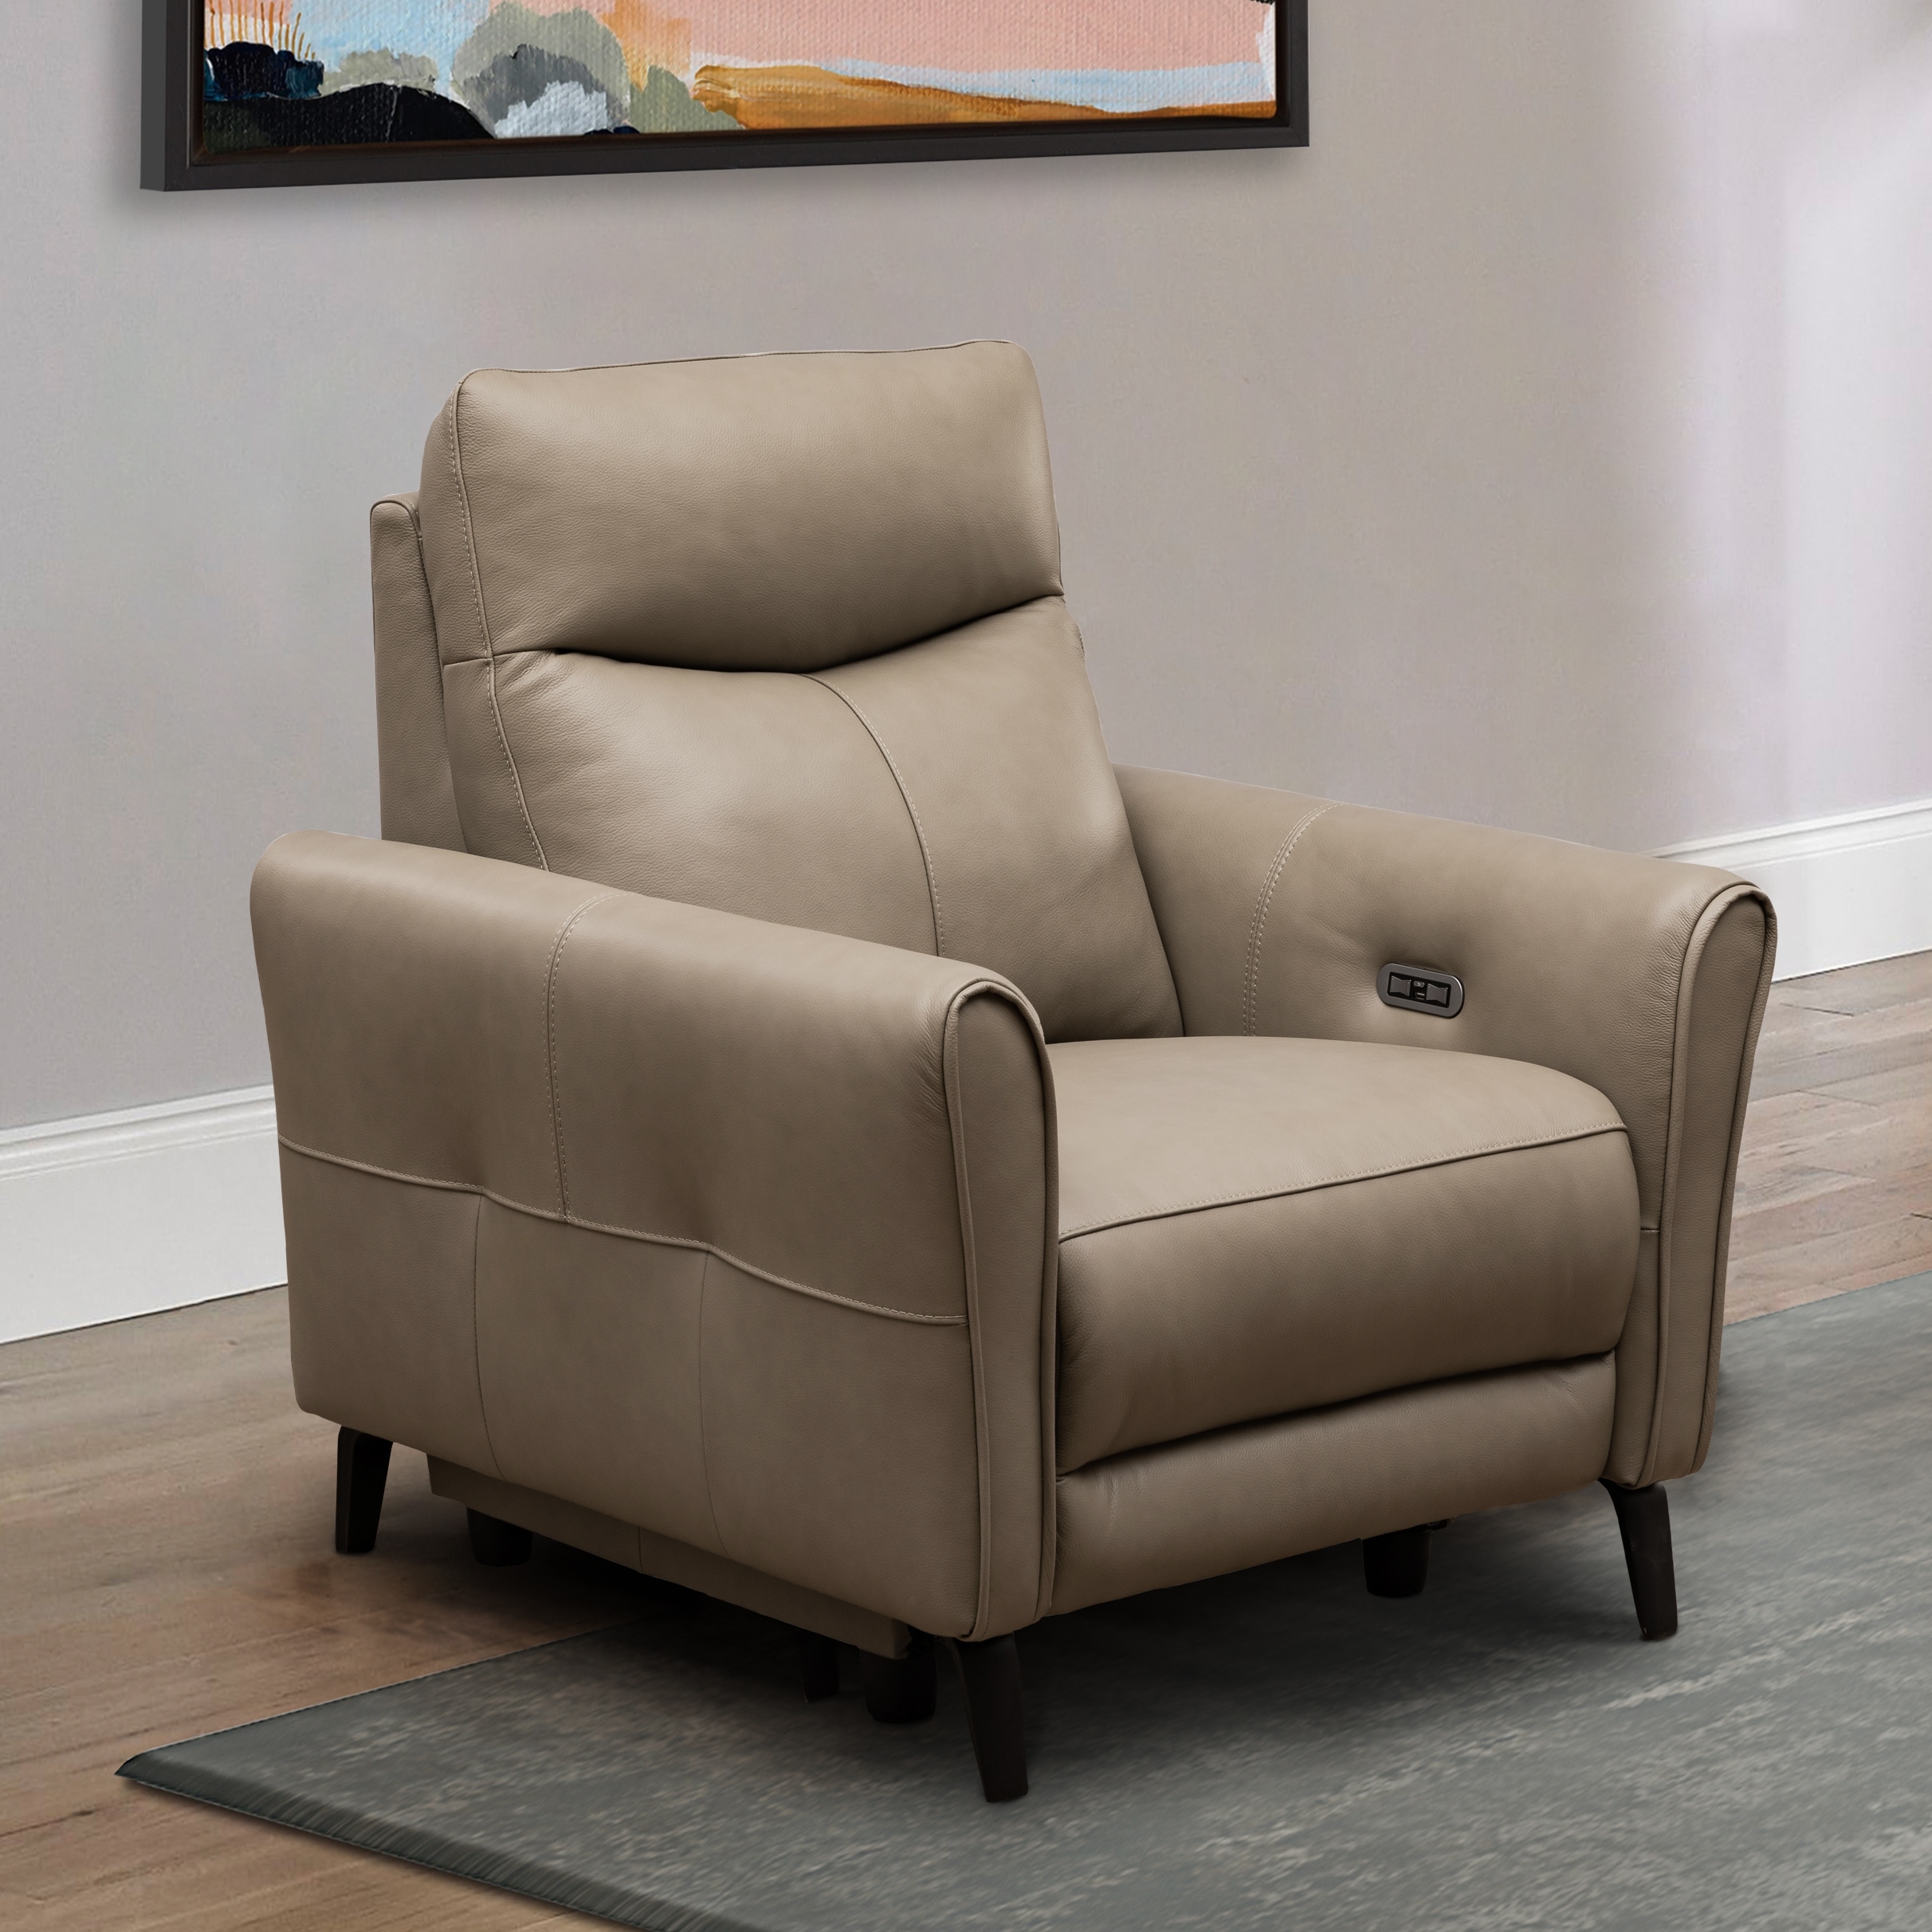 Abbyson Marley Beige Leather Power Recliner With Power Headrest